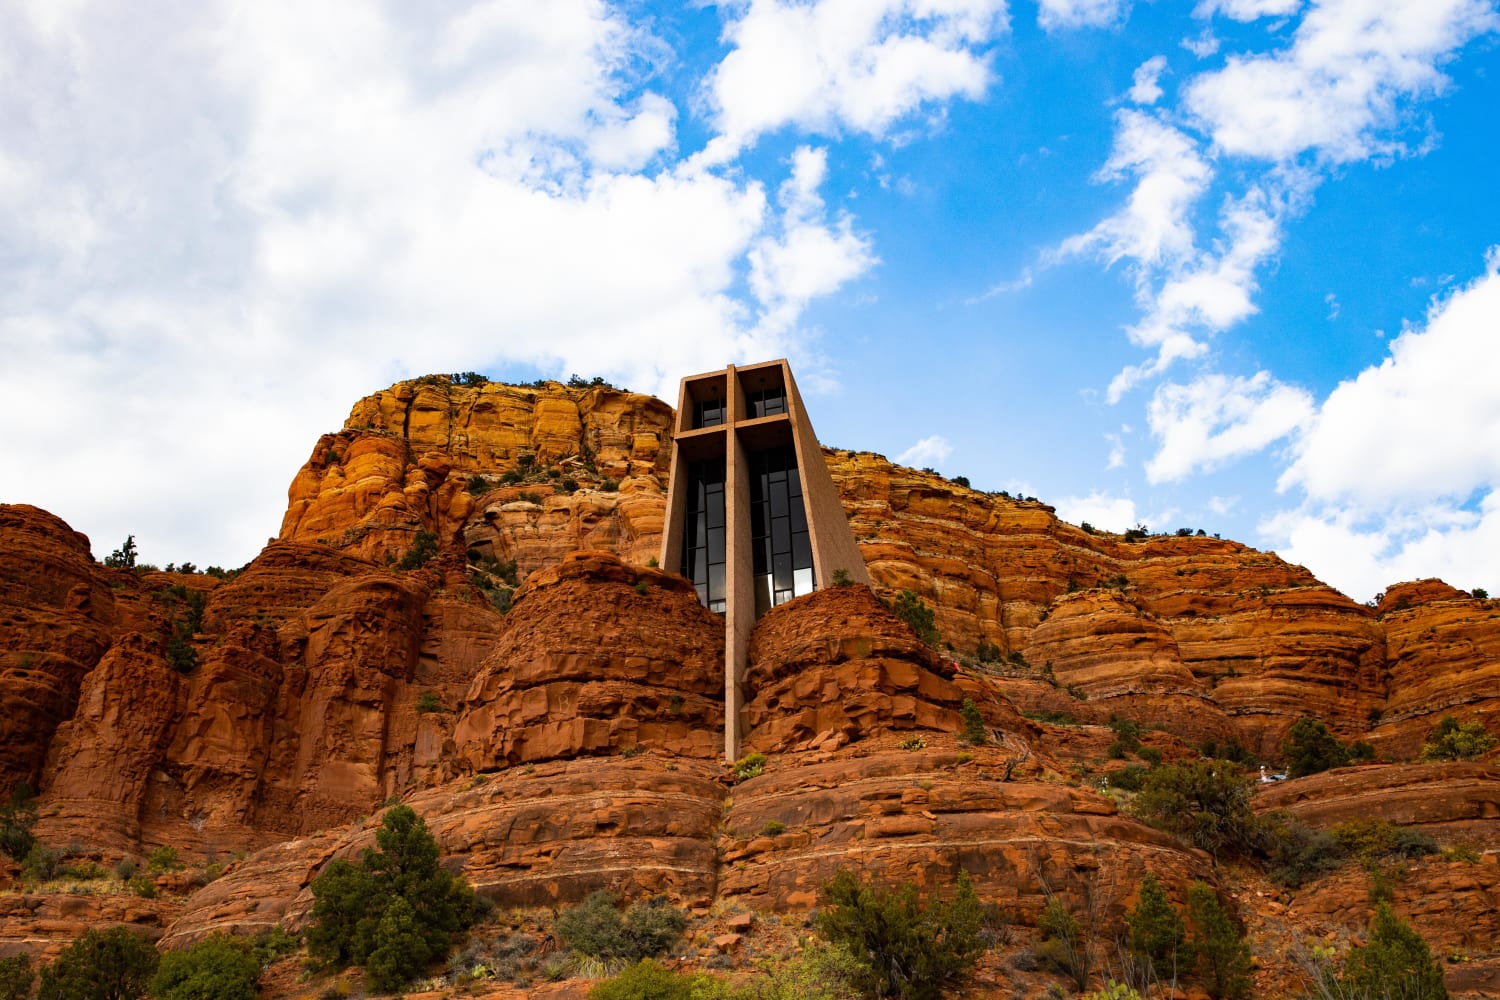 I believe this should be posted here as well. Chapel of the Holy Cross in Sedona, AZ.